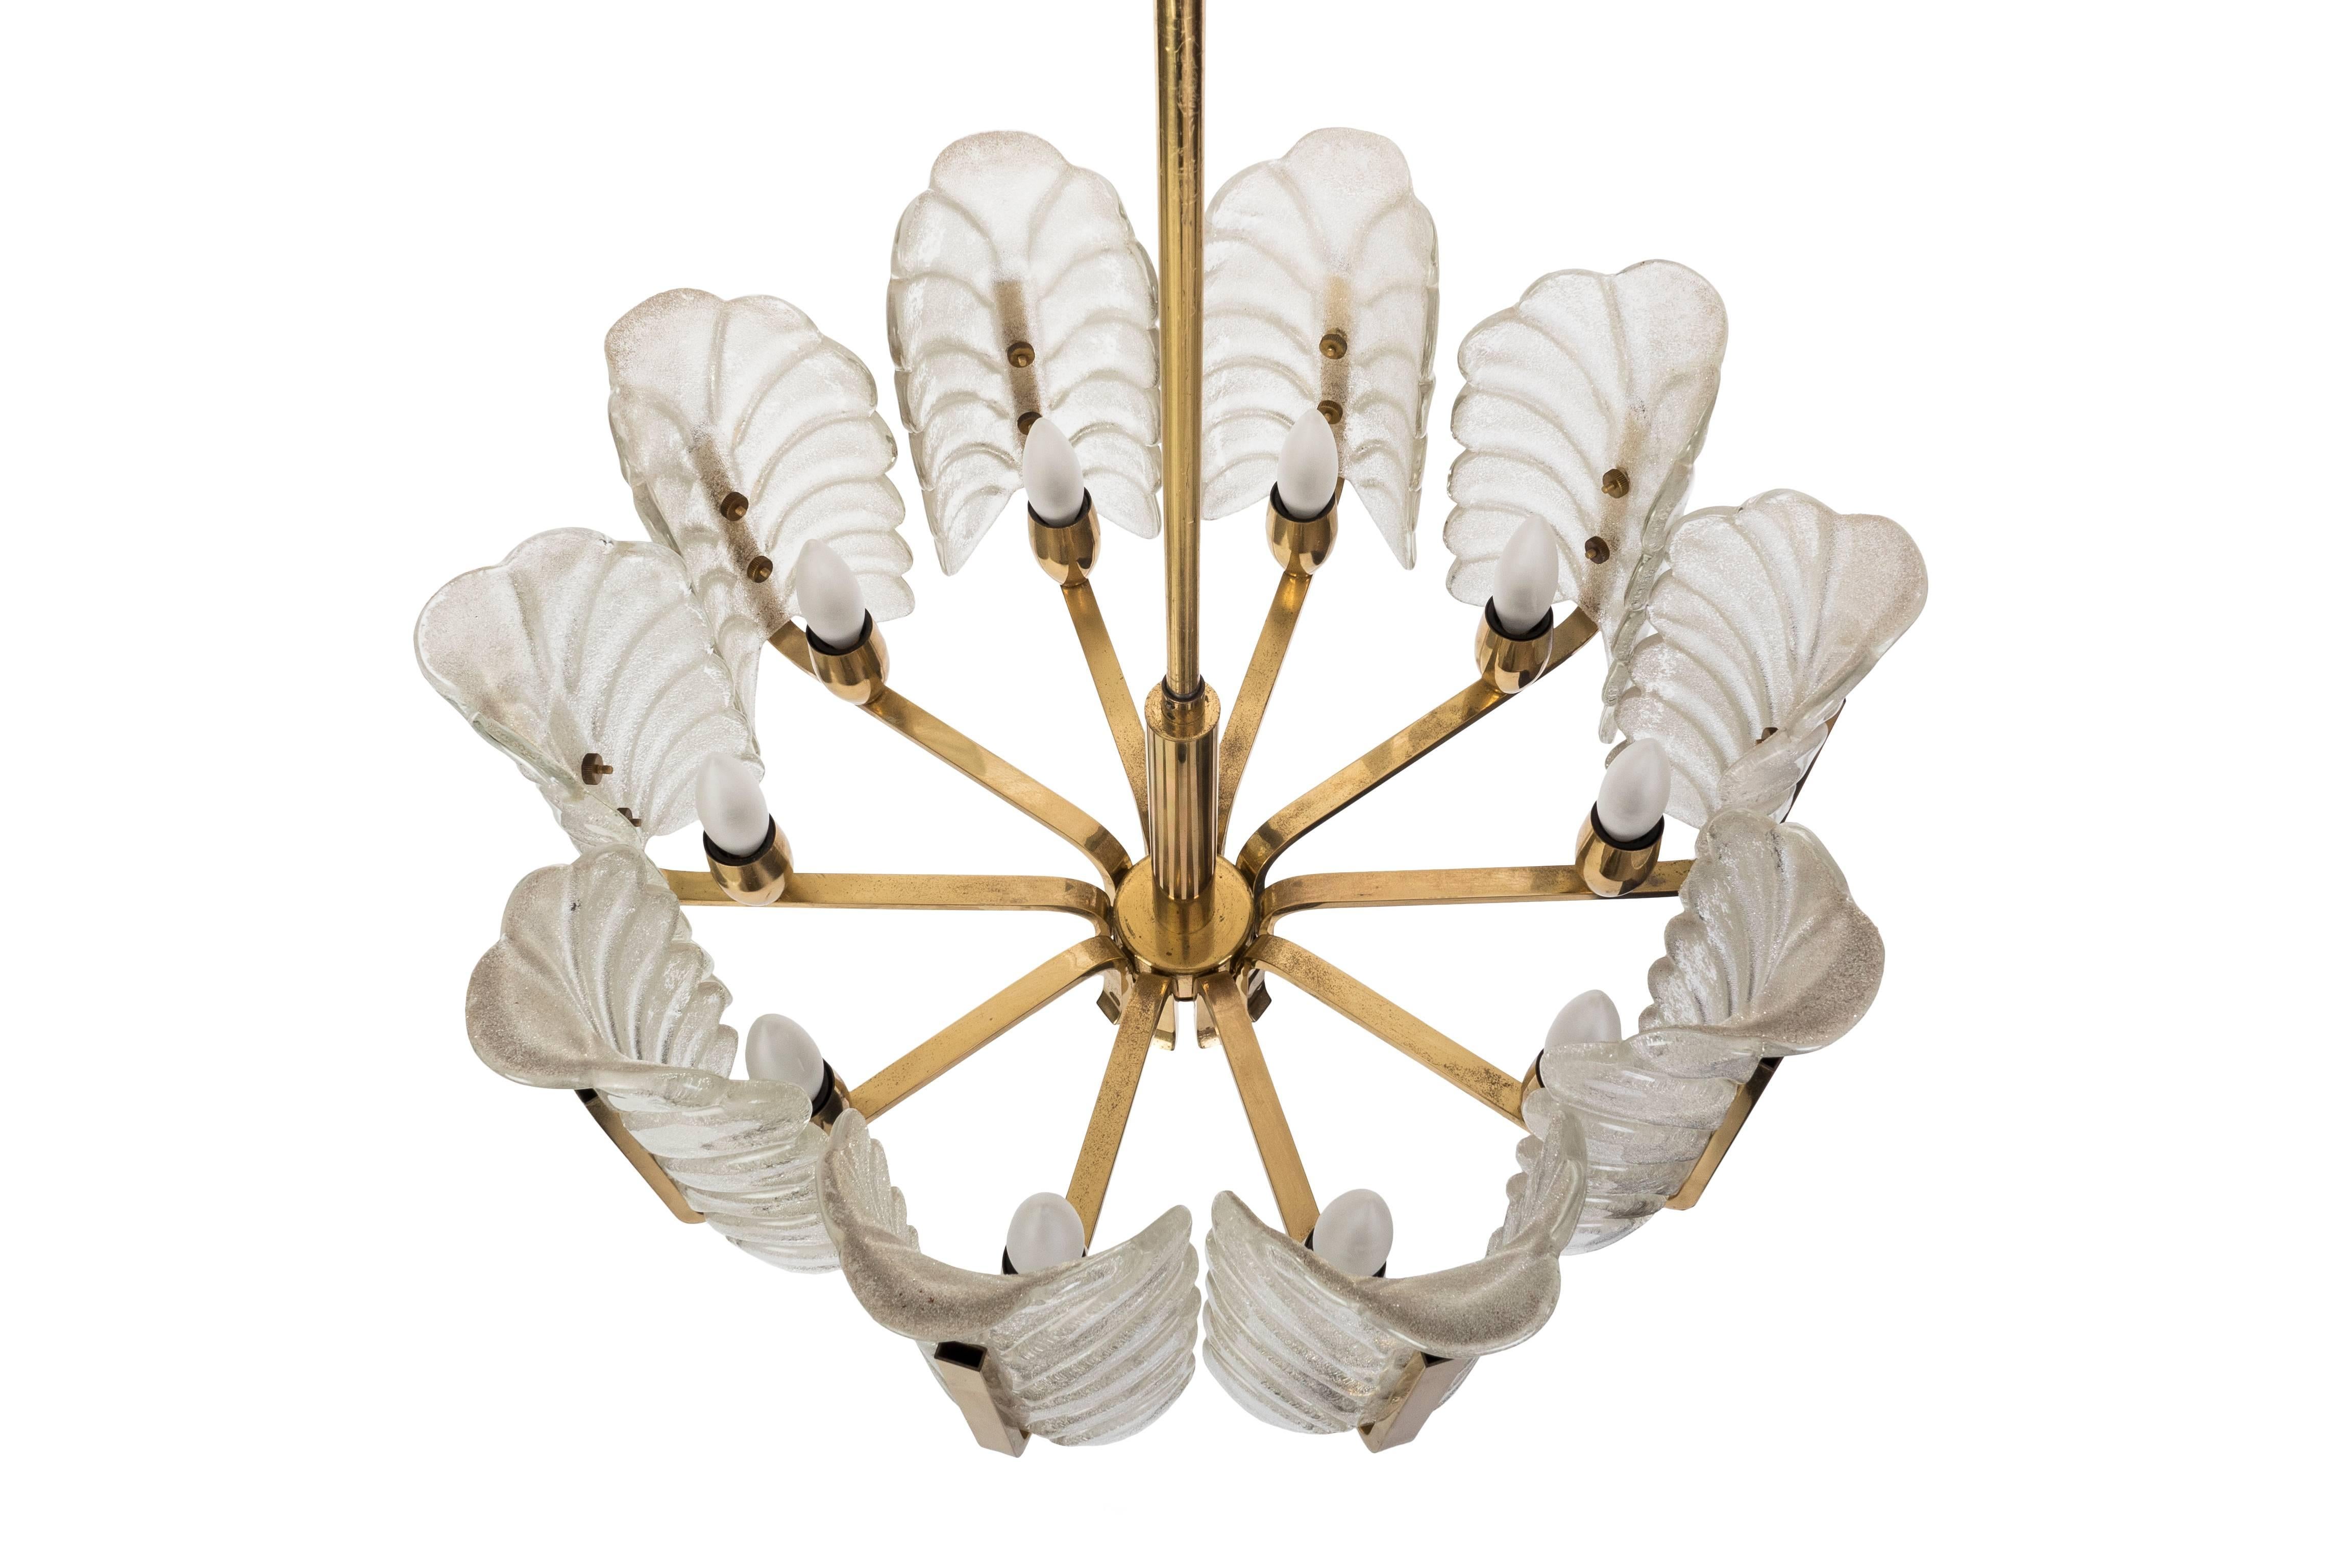 Swedish Exquisite Mid-Century Modernist Chandelier by Carl Fagerlund for Orrefors